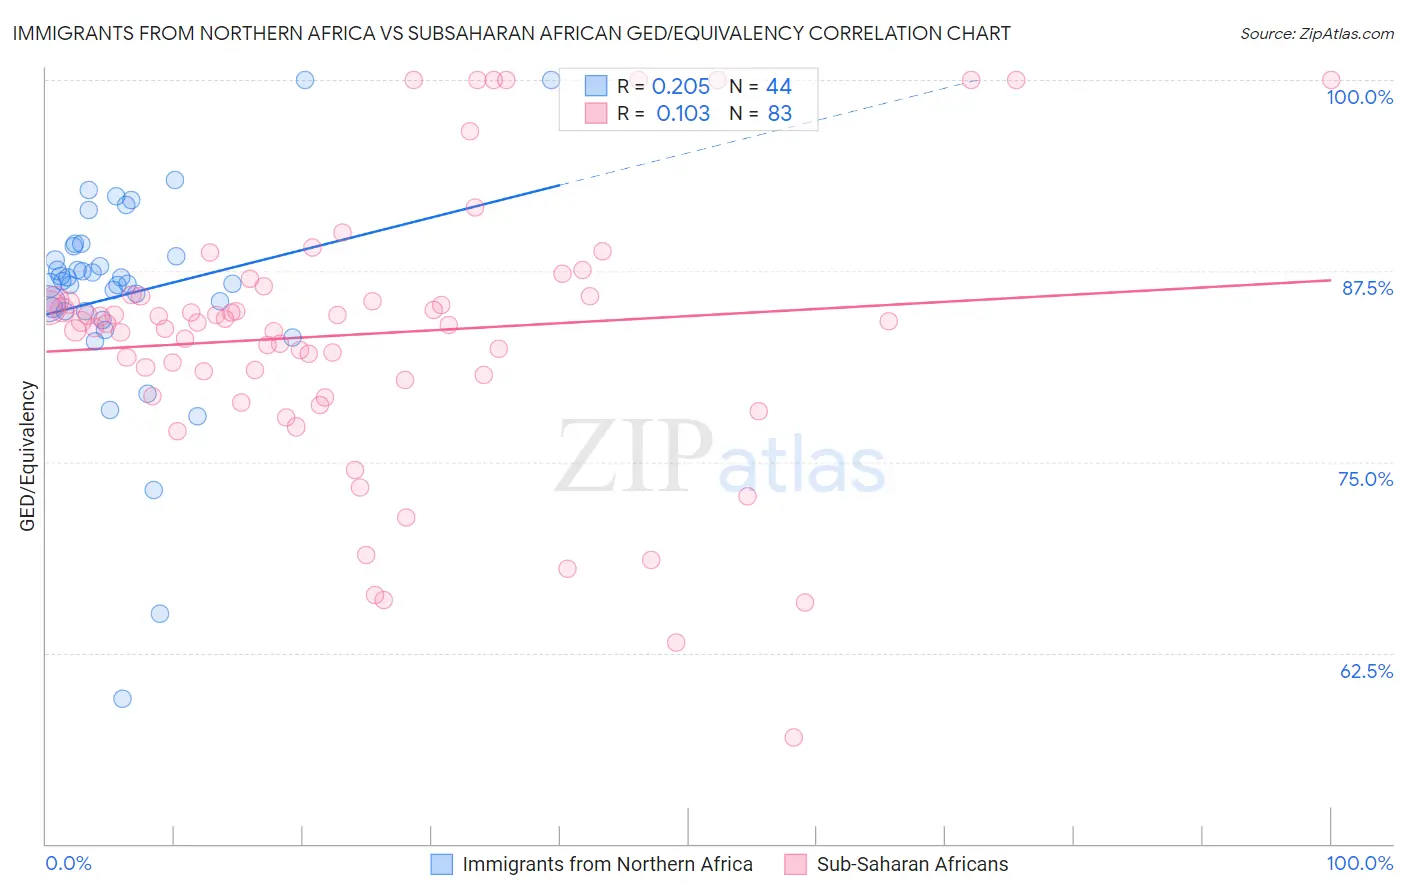 Immigrants from Northern Africa vs Subsaharan African GED/Equivalency